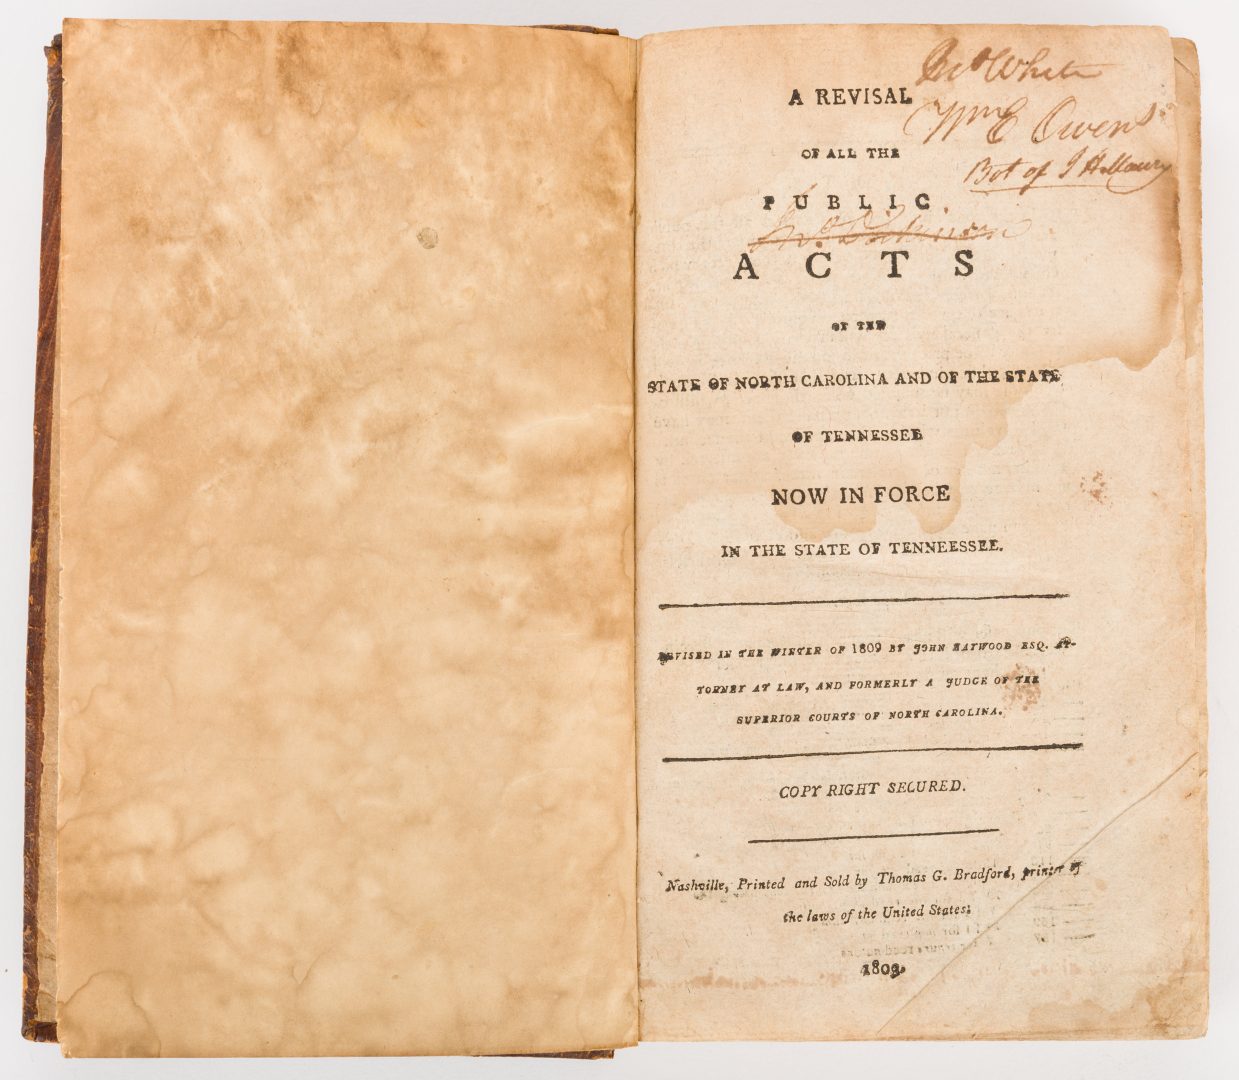 Lot 238: Revisal of All Public Acts of NC & TN, Haywood, 1809